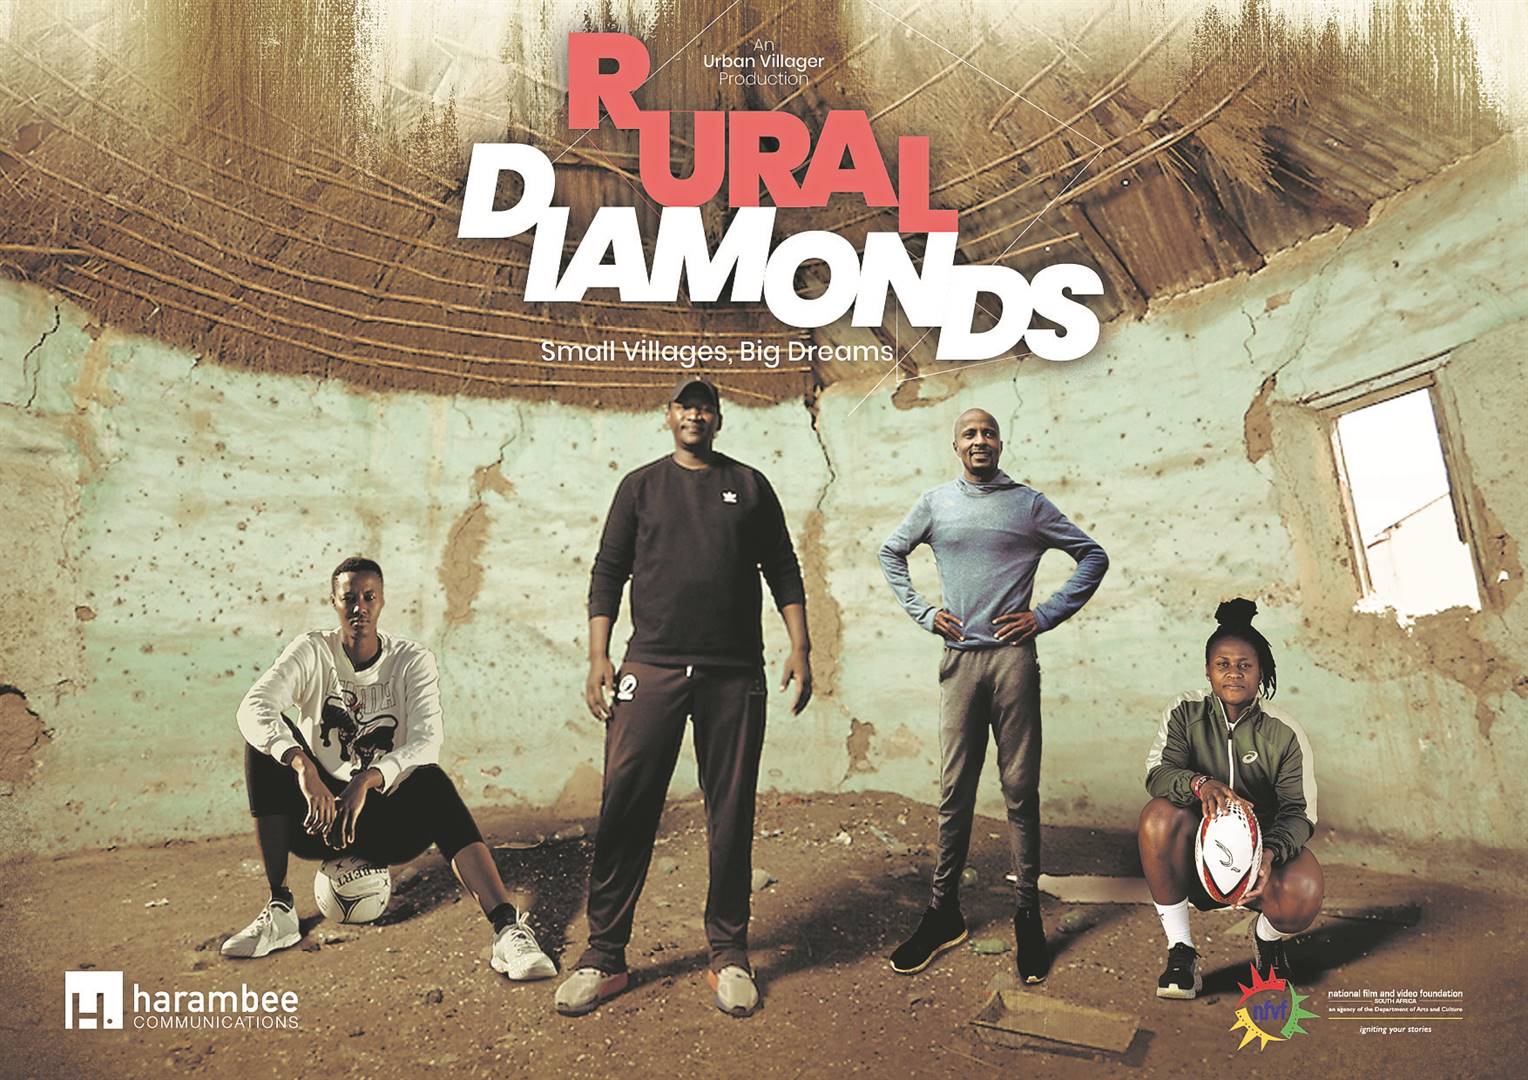 The poster for the documentary, ‘Rural Diamonds - Small Village, Big Dreams’.   